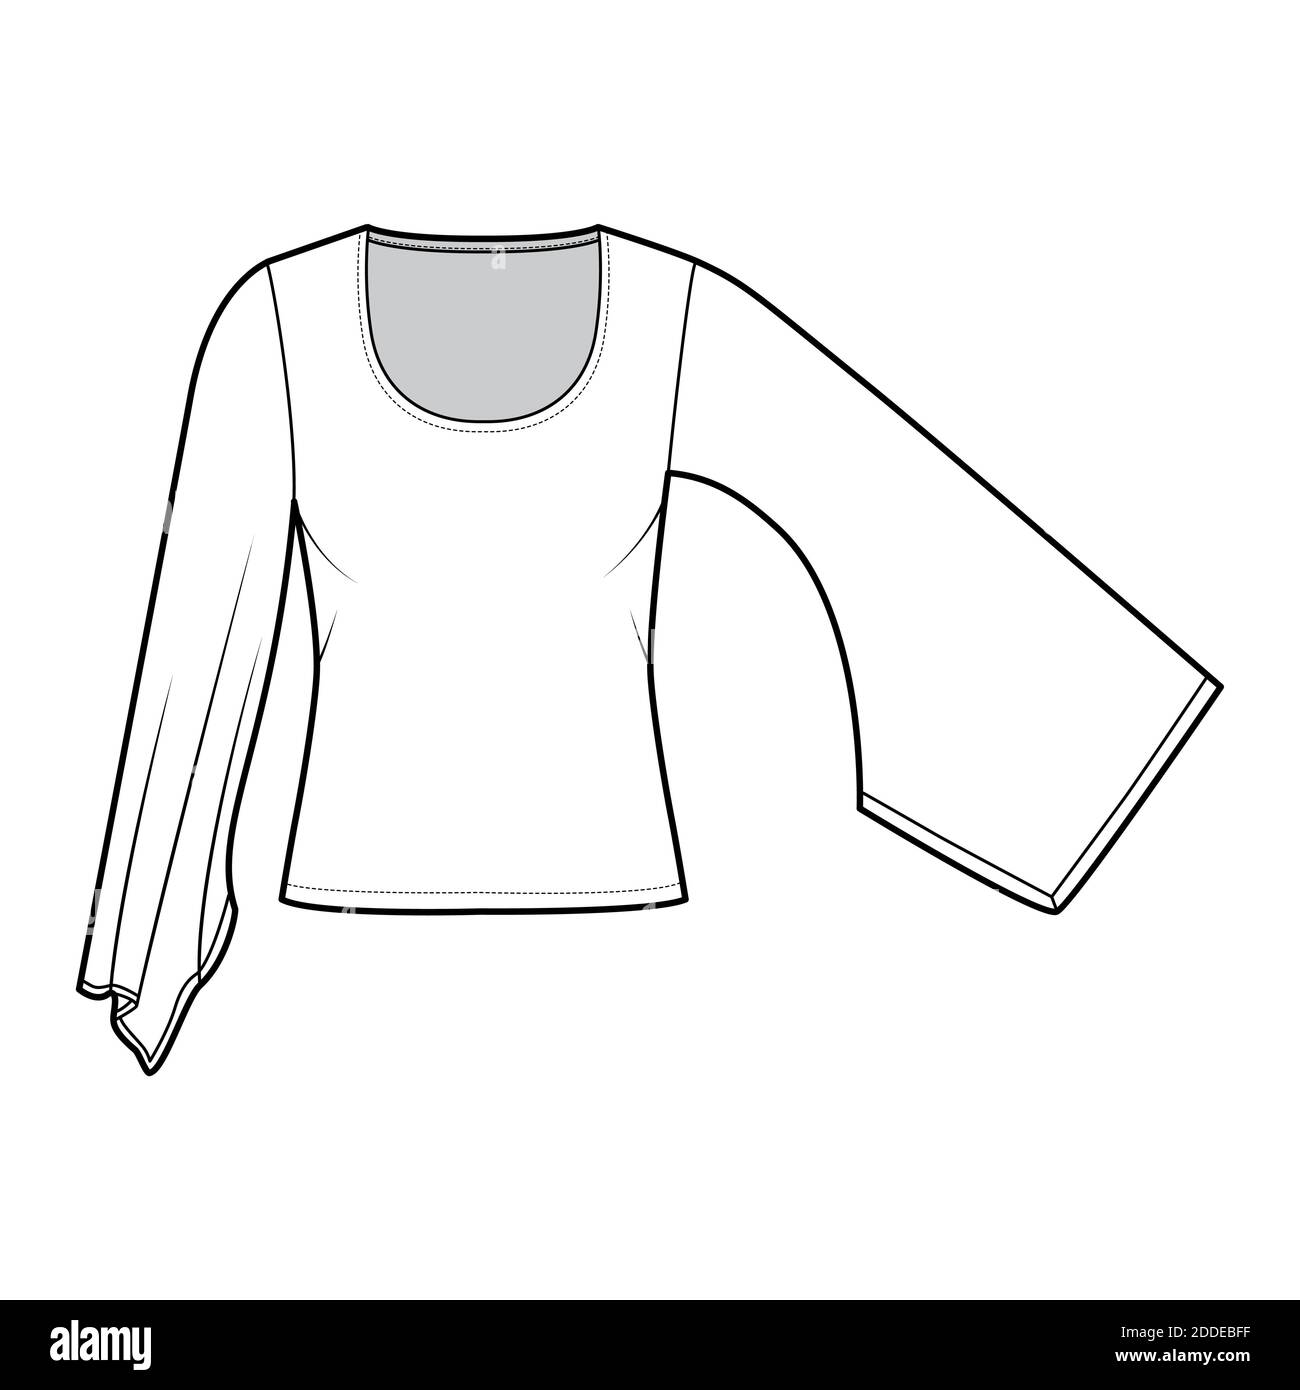 Top with Kimono long sleeves technical fashion illustration with relax fit,  under waist length, round neckline. Flat apparel blouse template front,  white color. Women men unisex shirt CAD mockup Stock Vector Image